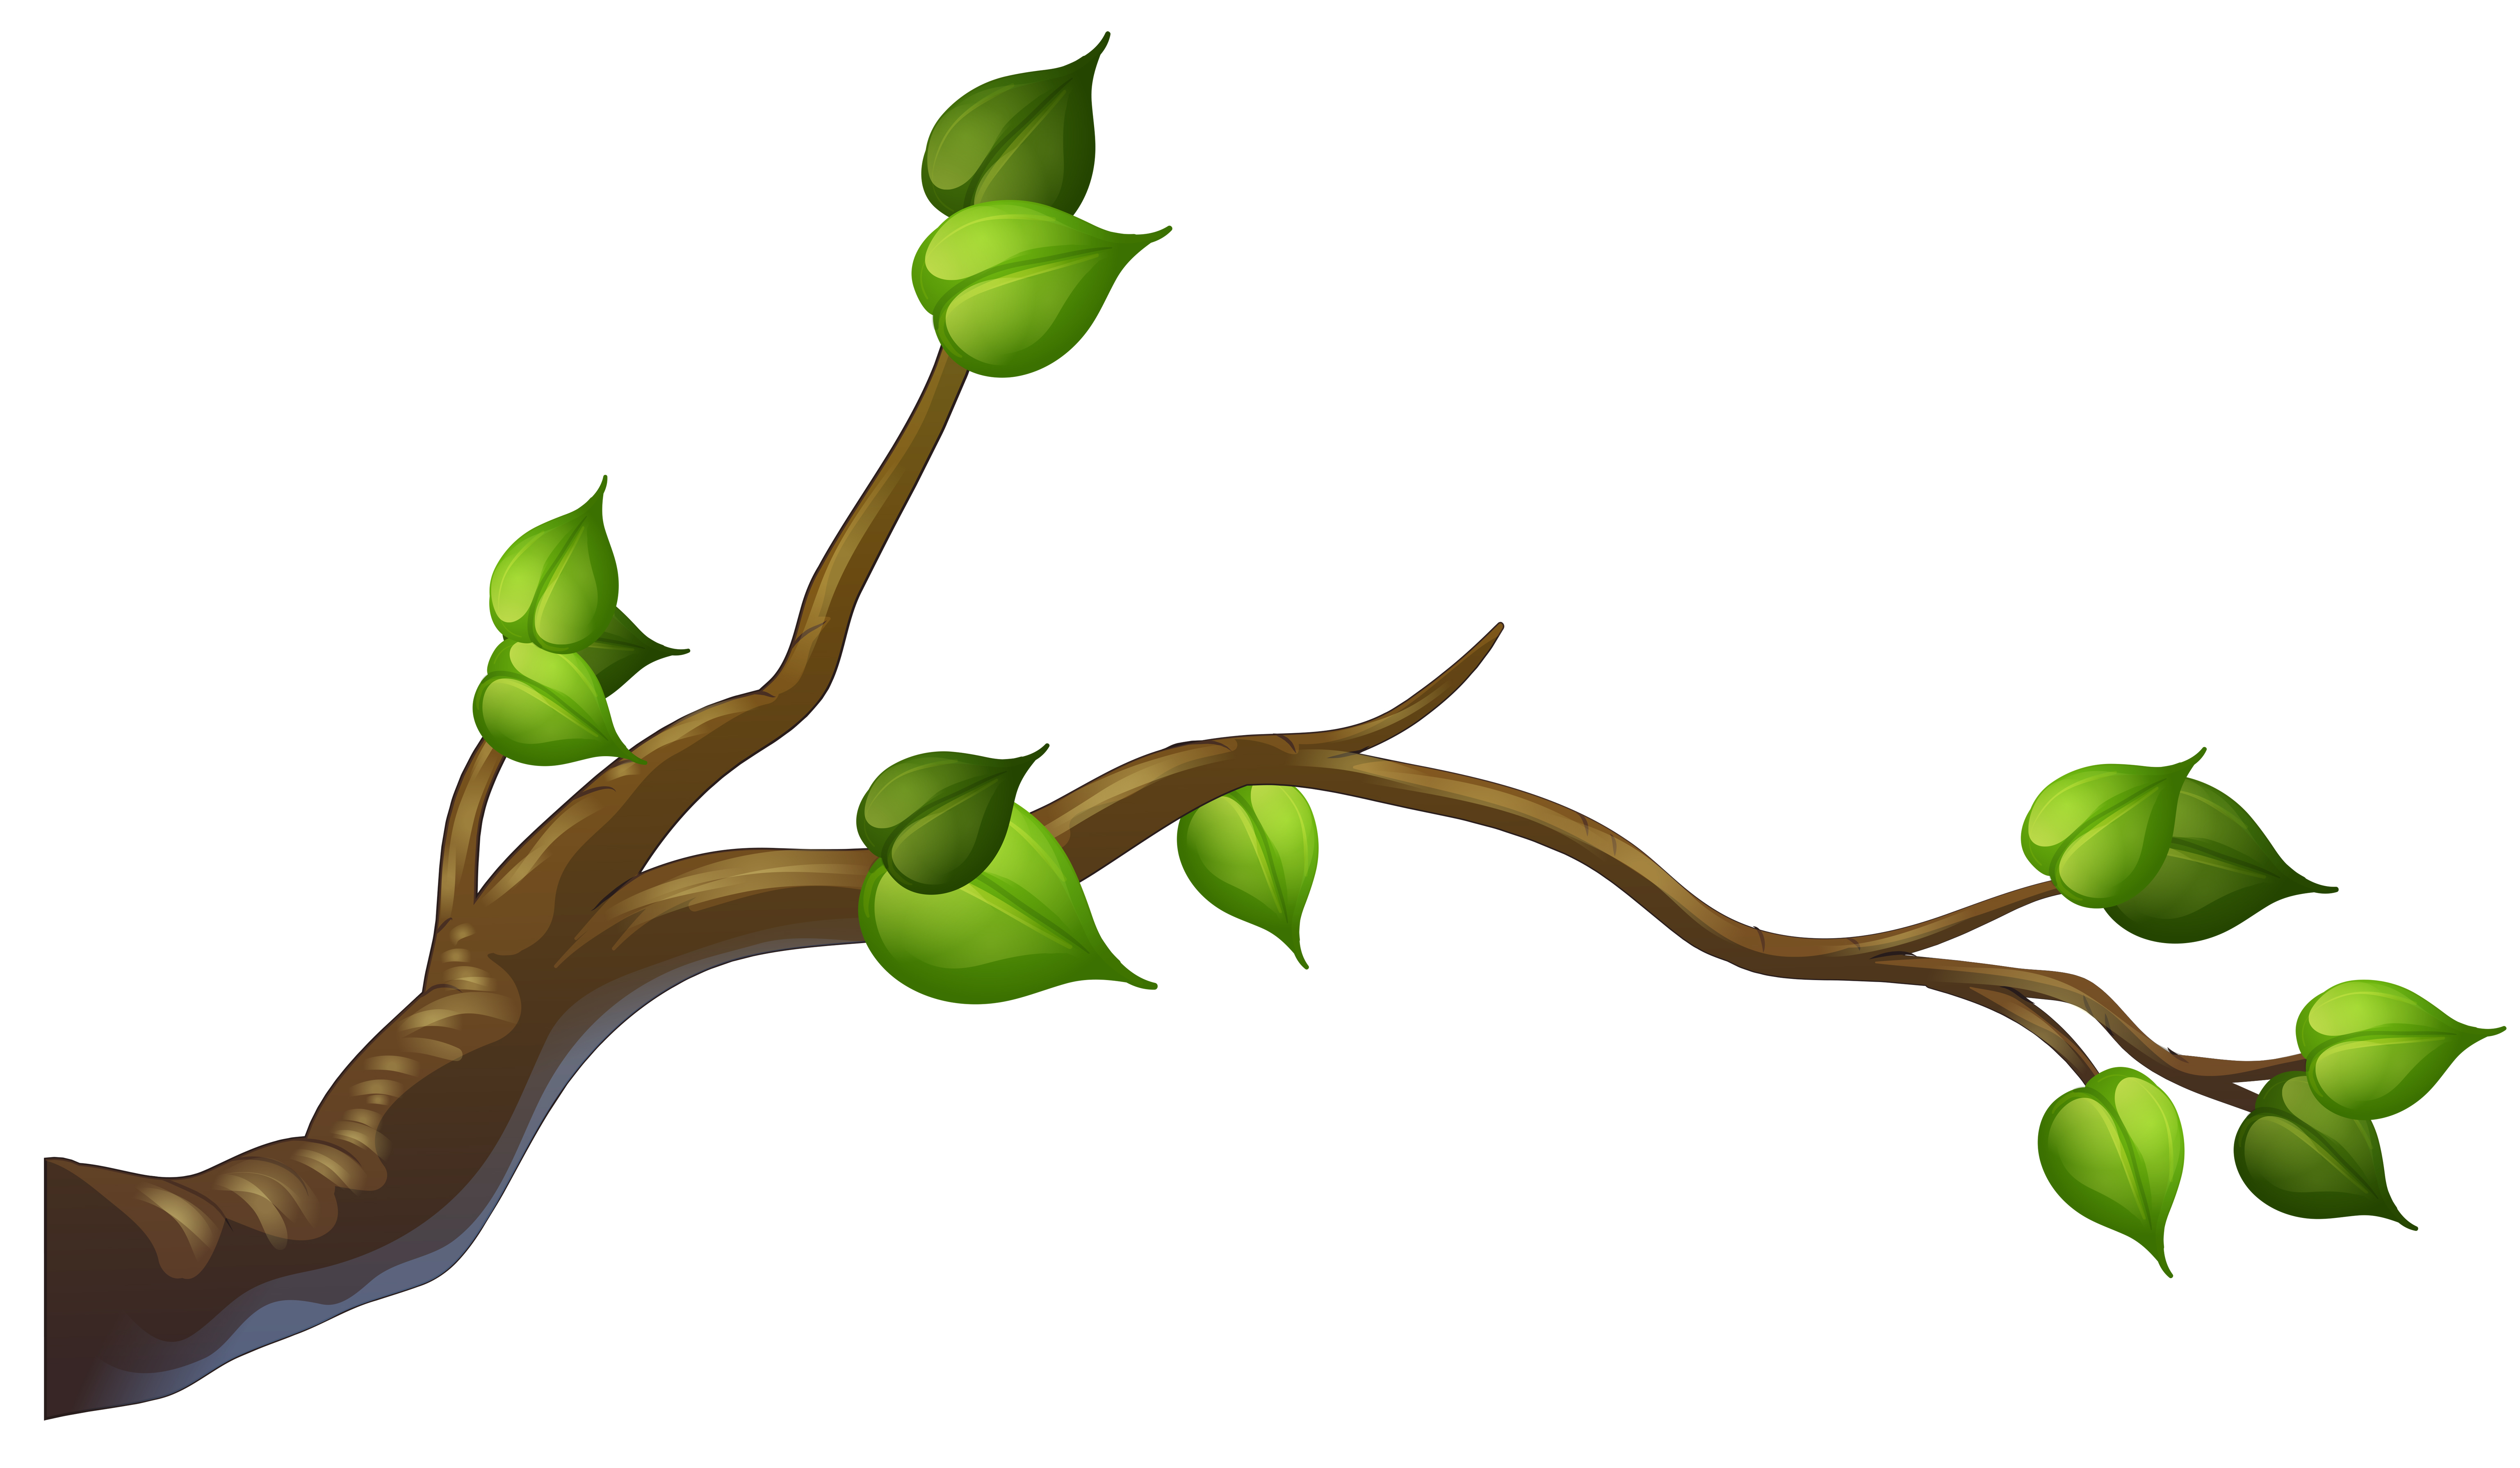 Tree branch on white background - Download Free Vectors ...